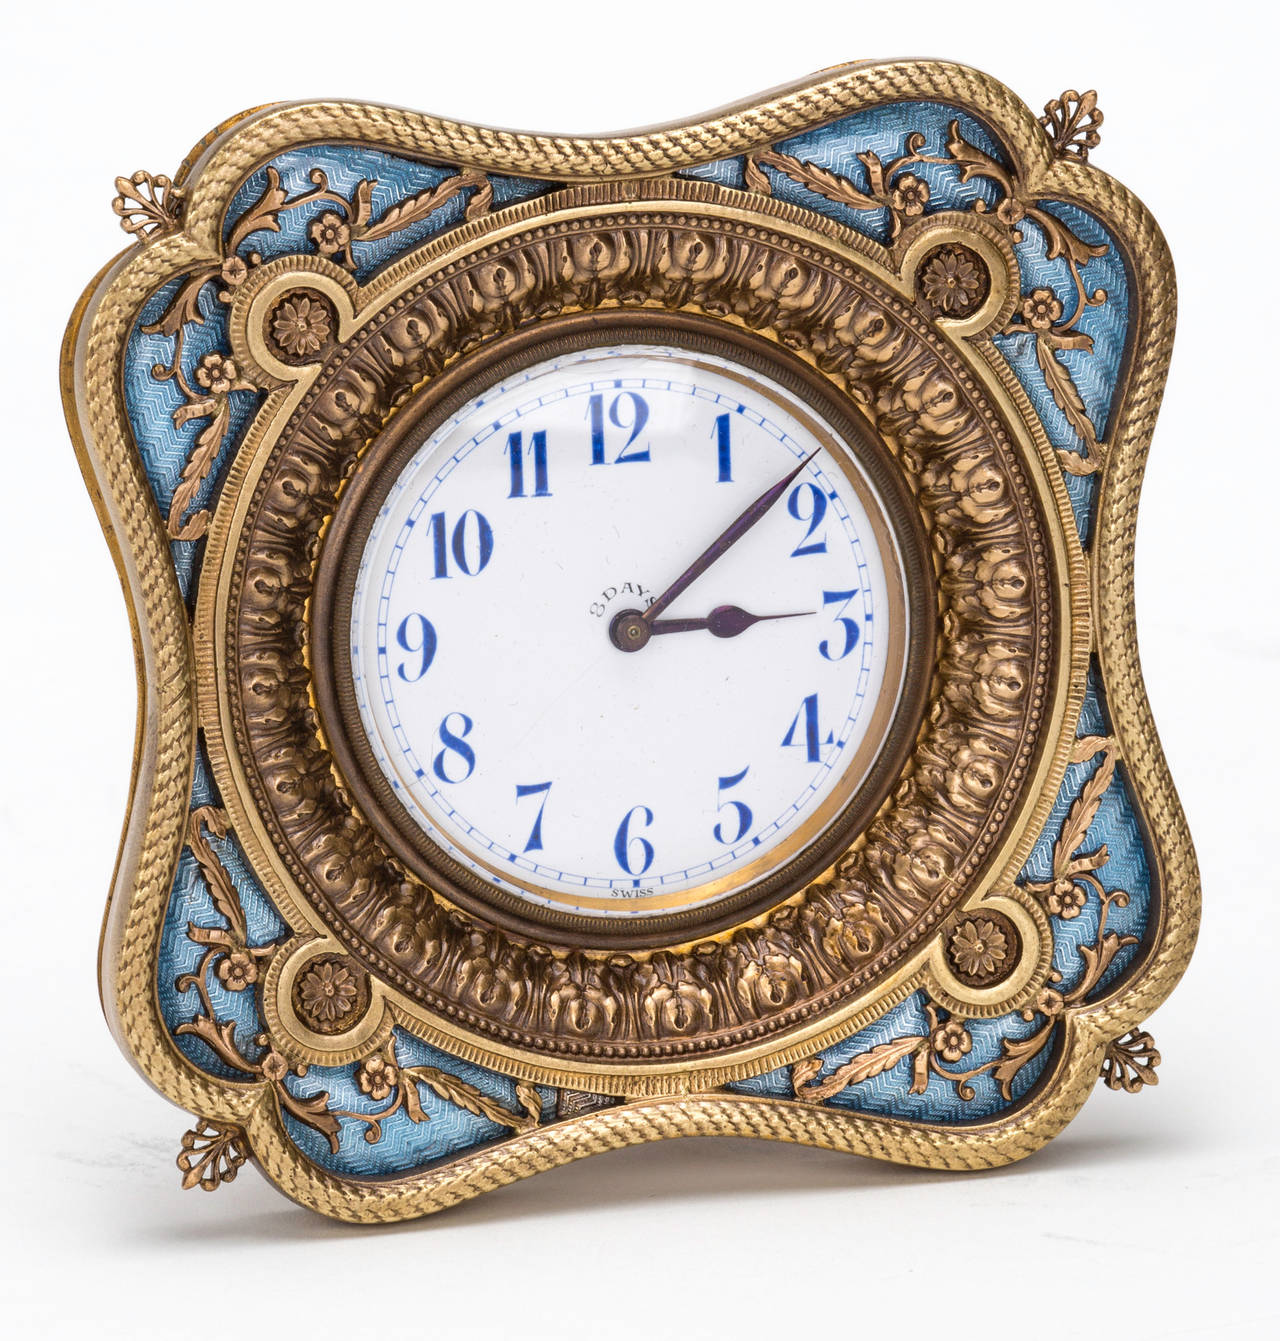 Lovely French Style blue guillioche enamel and gilt bronze  clock.  8 day wind up.  Pull up to set time.  Made by S Nordlinger & Sons in the early 1900s.  Working condition.